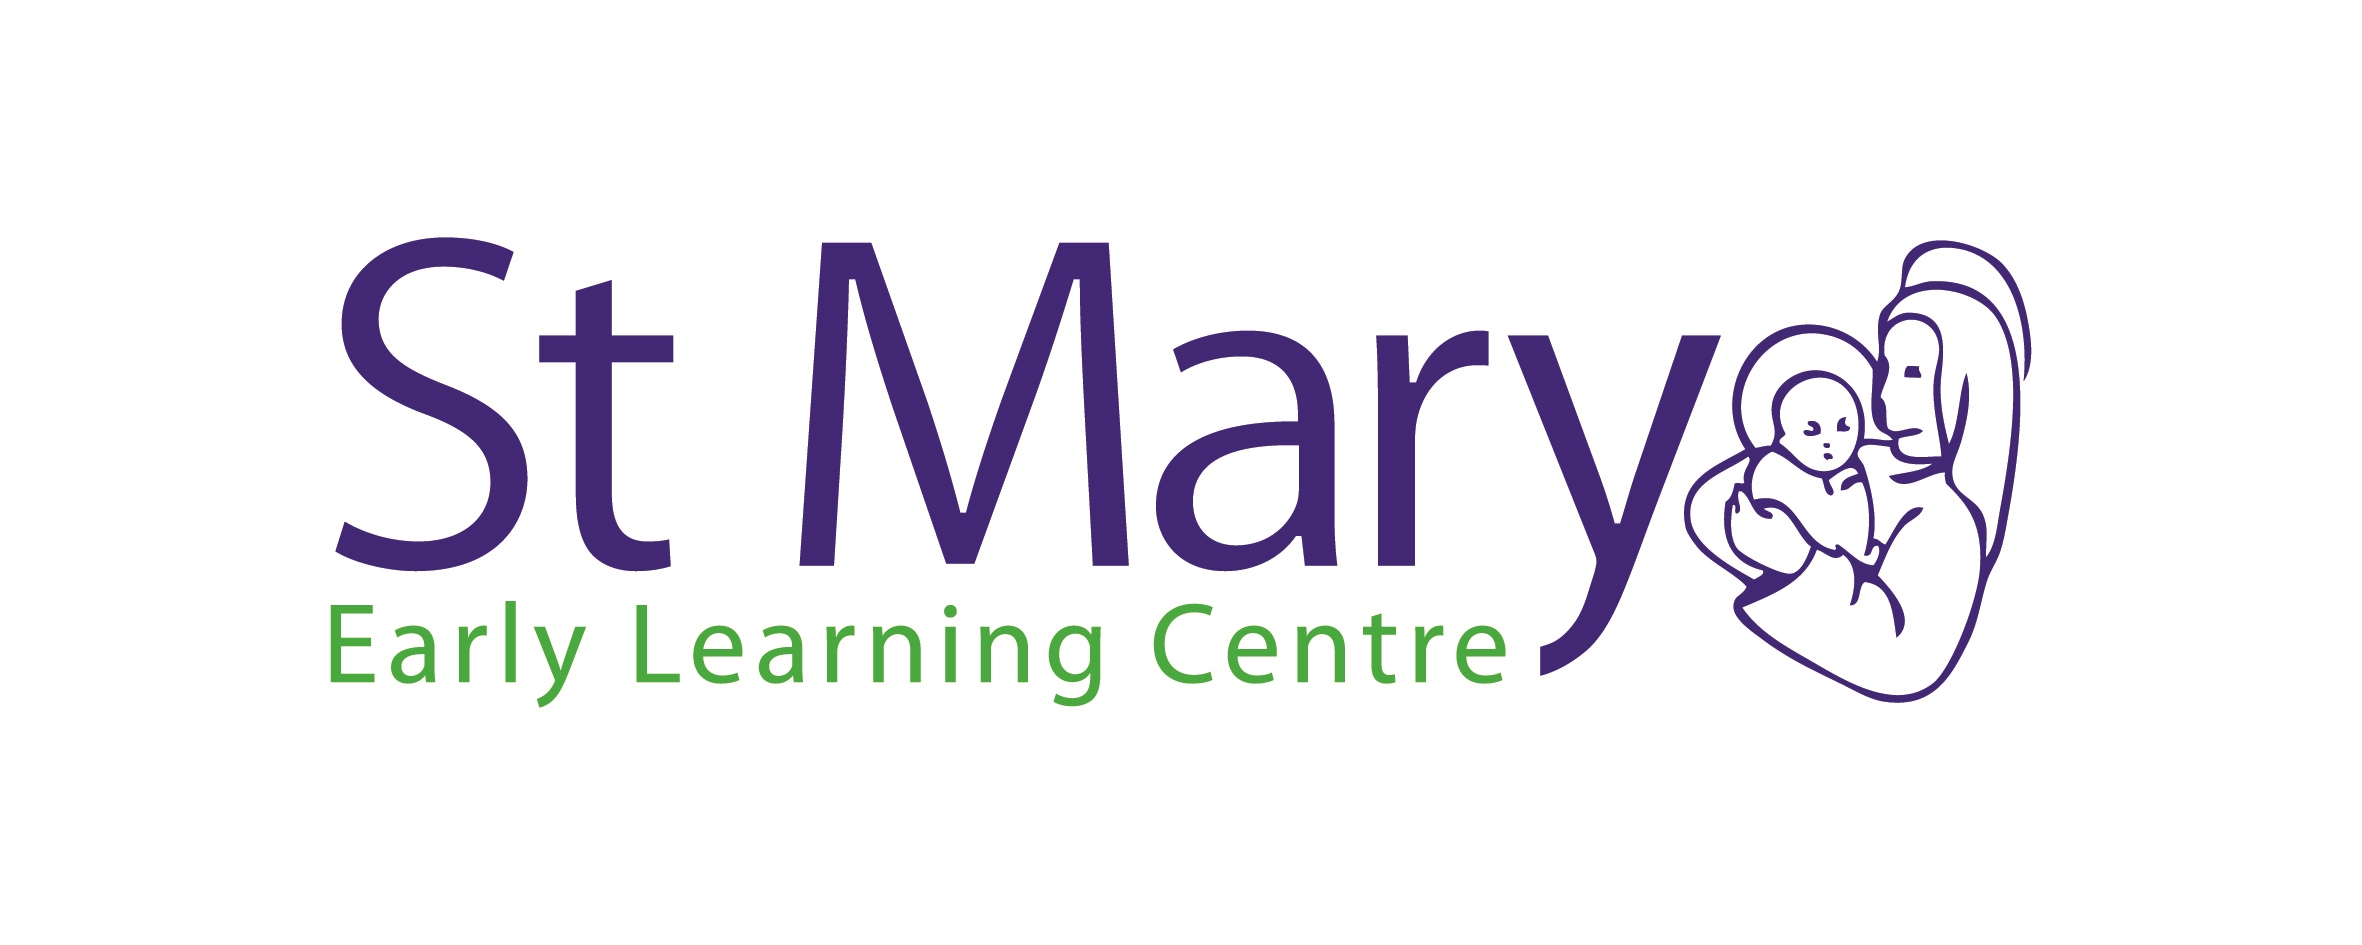 St Mary's Early Learning Centre - Prairiewood